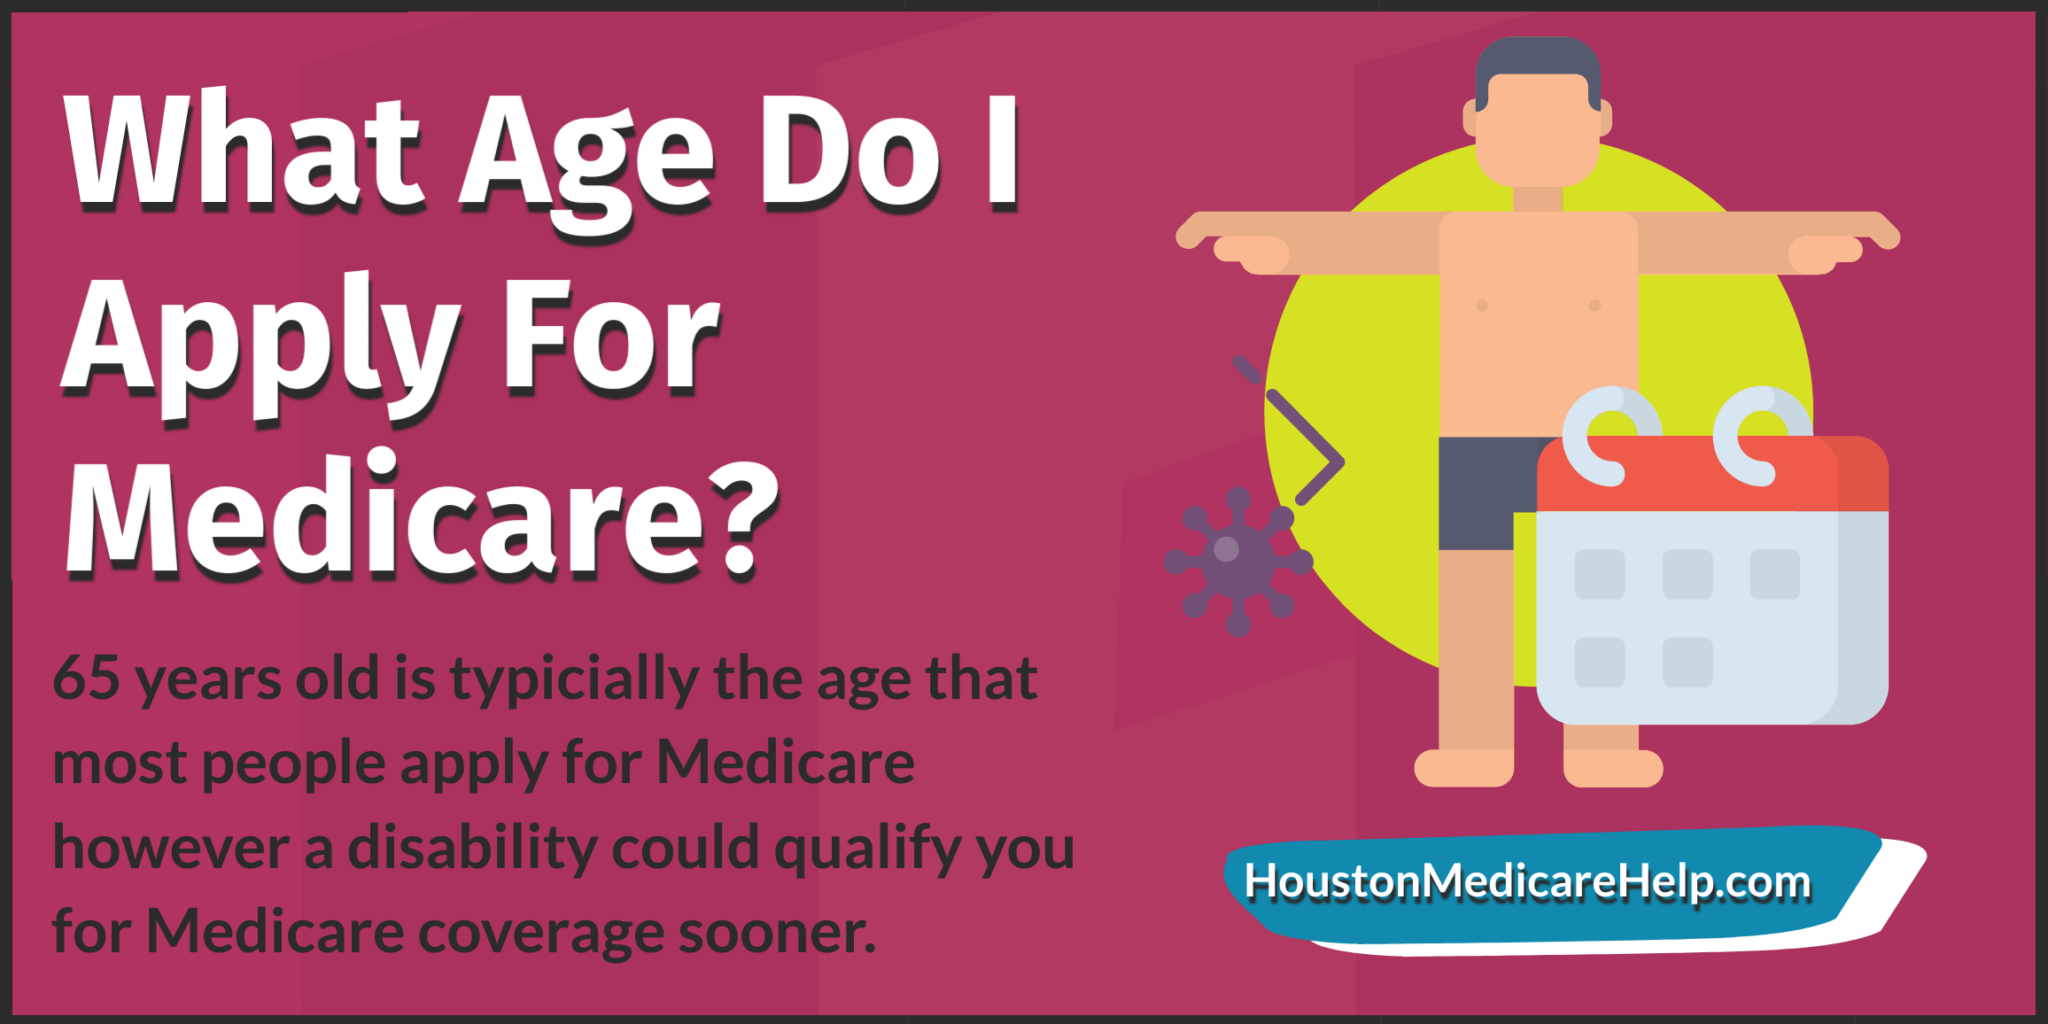 What Age Do I Apply For Medicare?